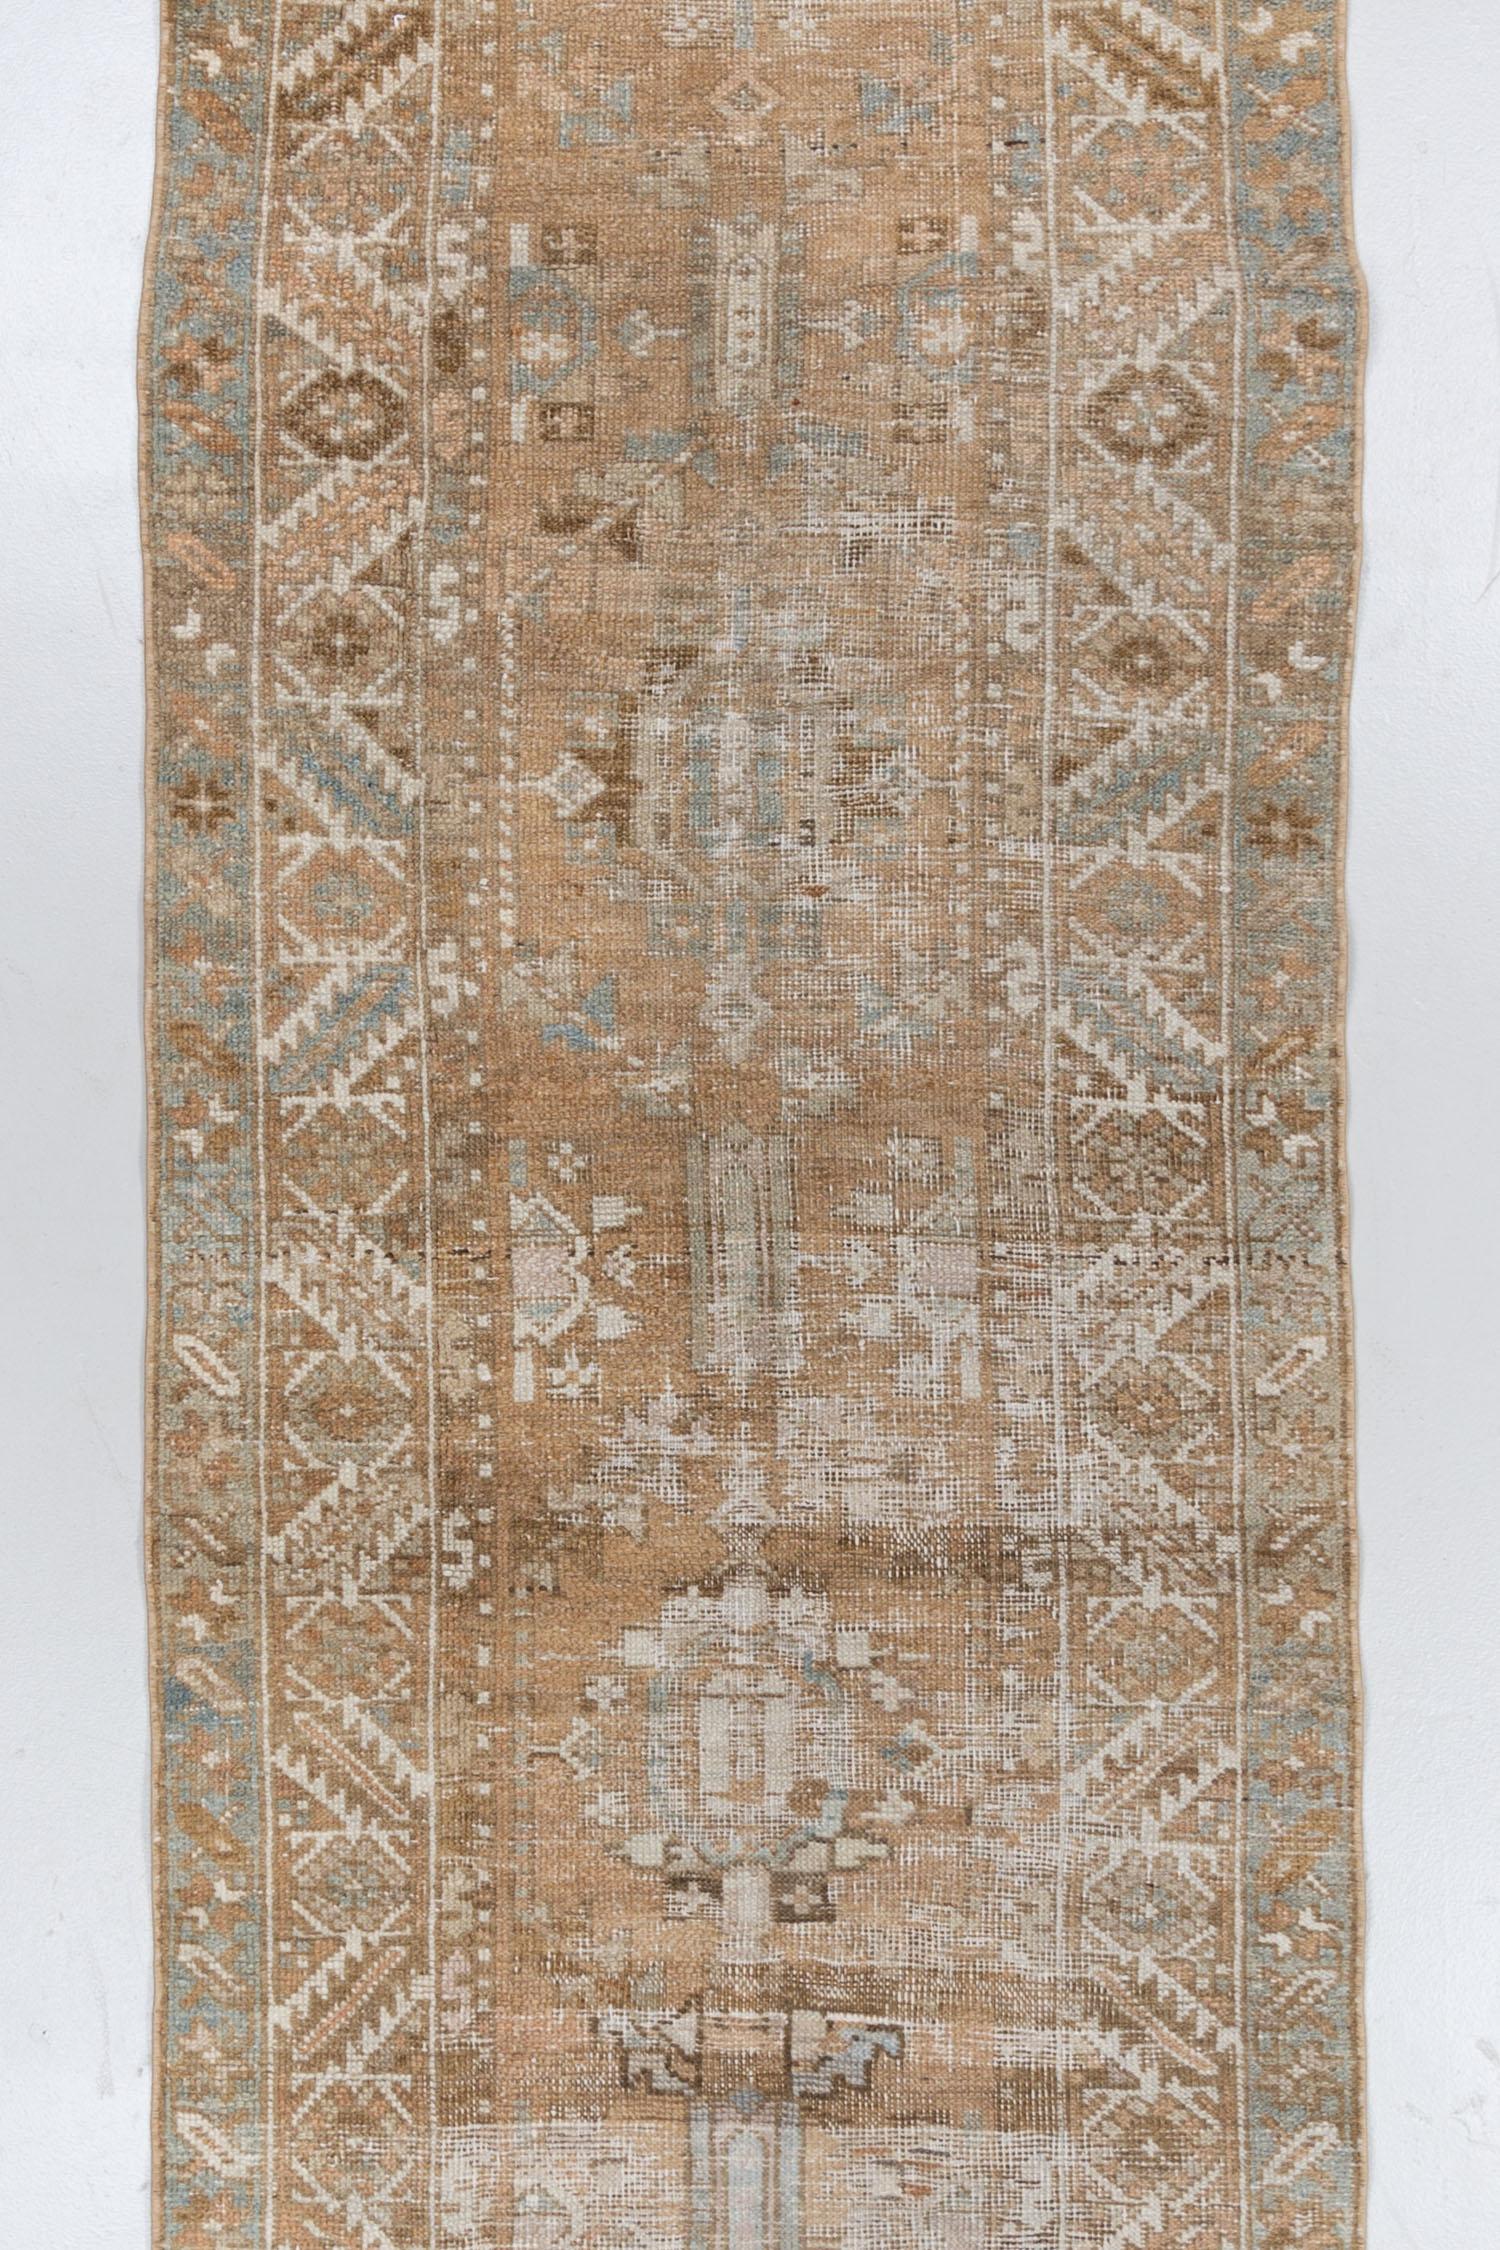 Vintage Persian Heriz Runner Rug In Good Condition For Sale In West Palm Beach, FL